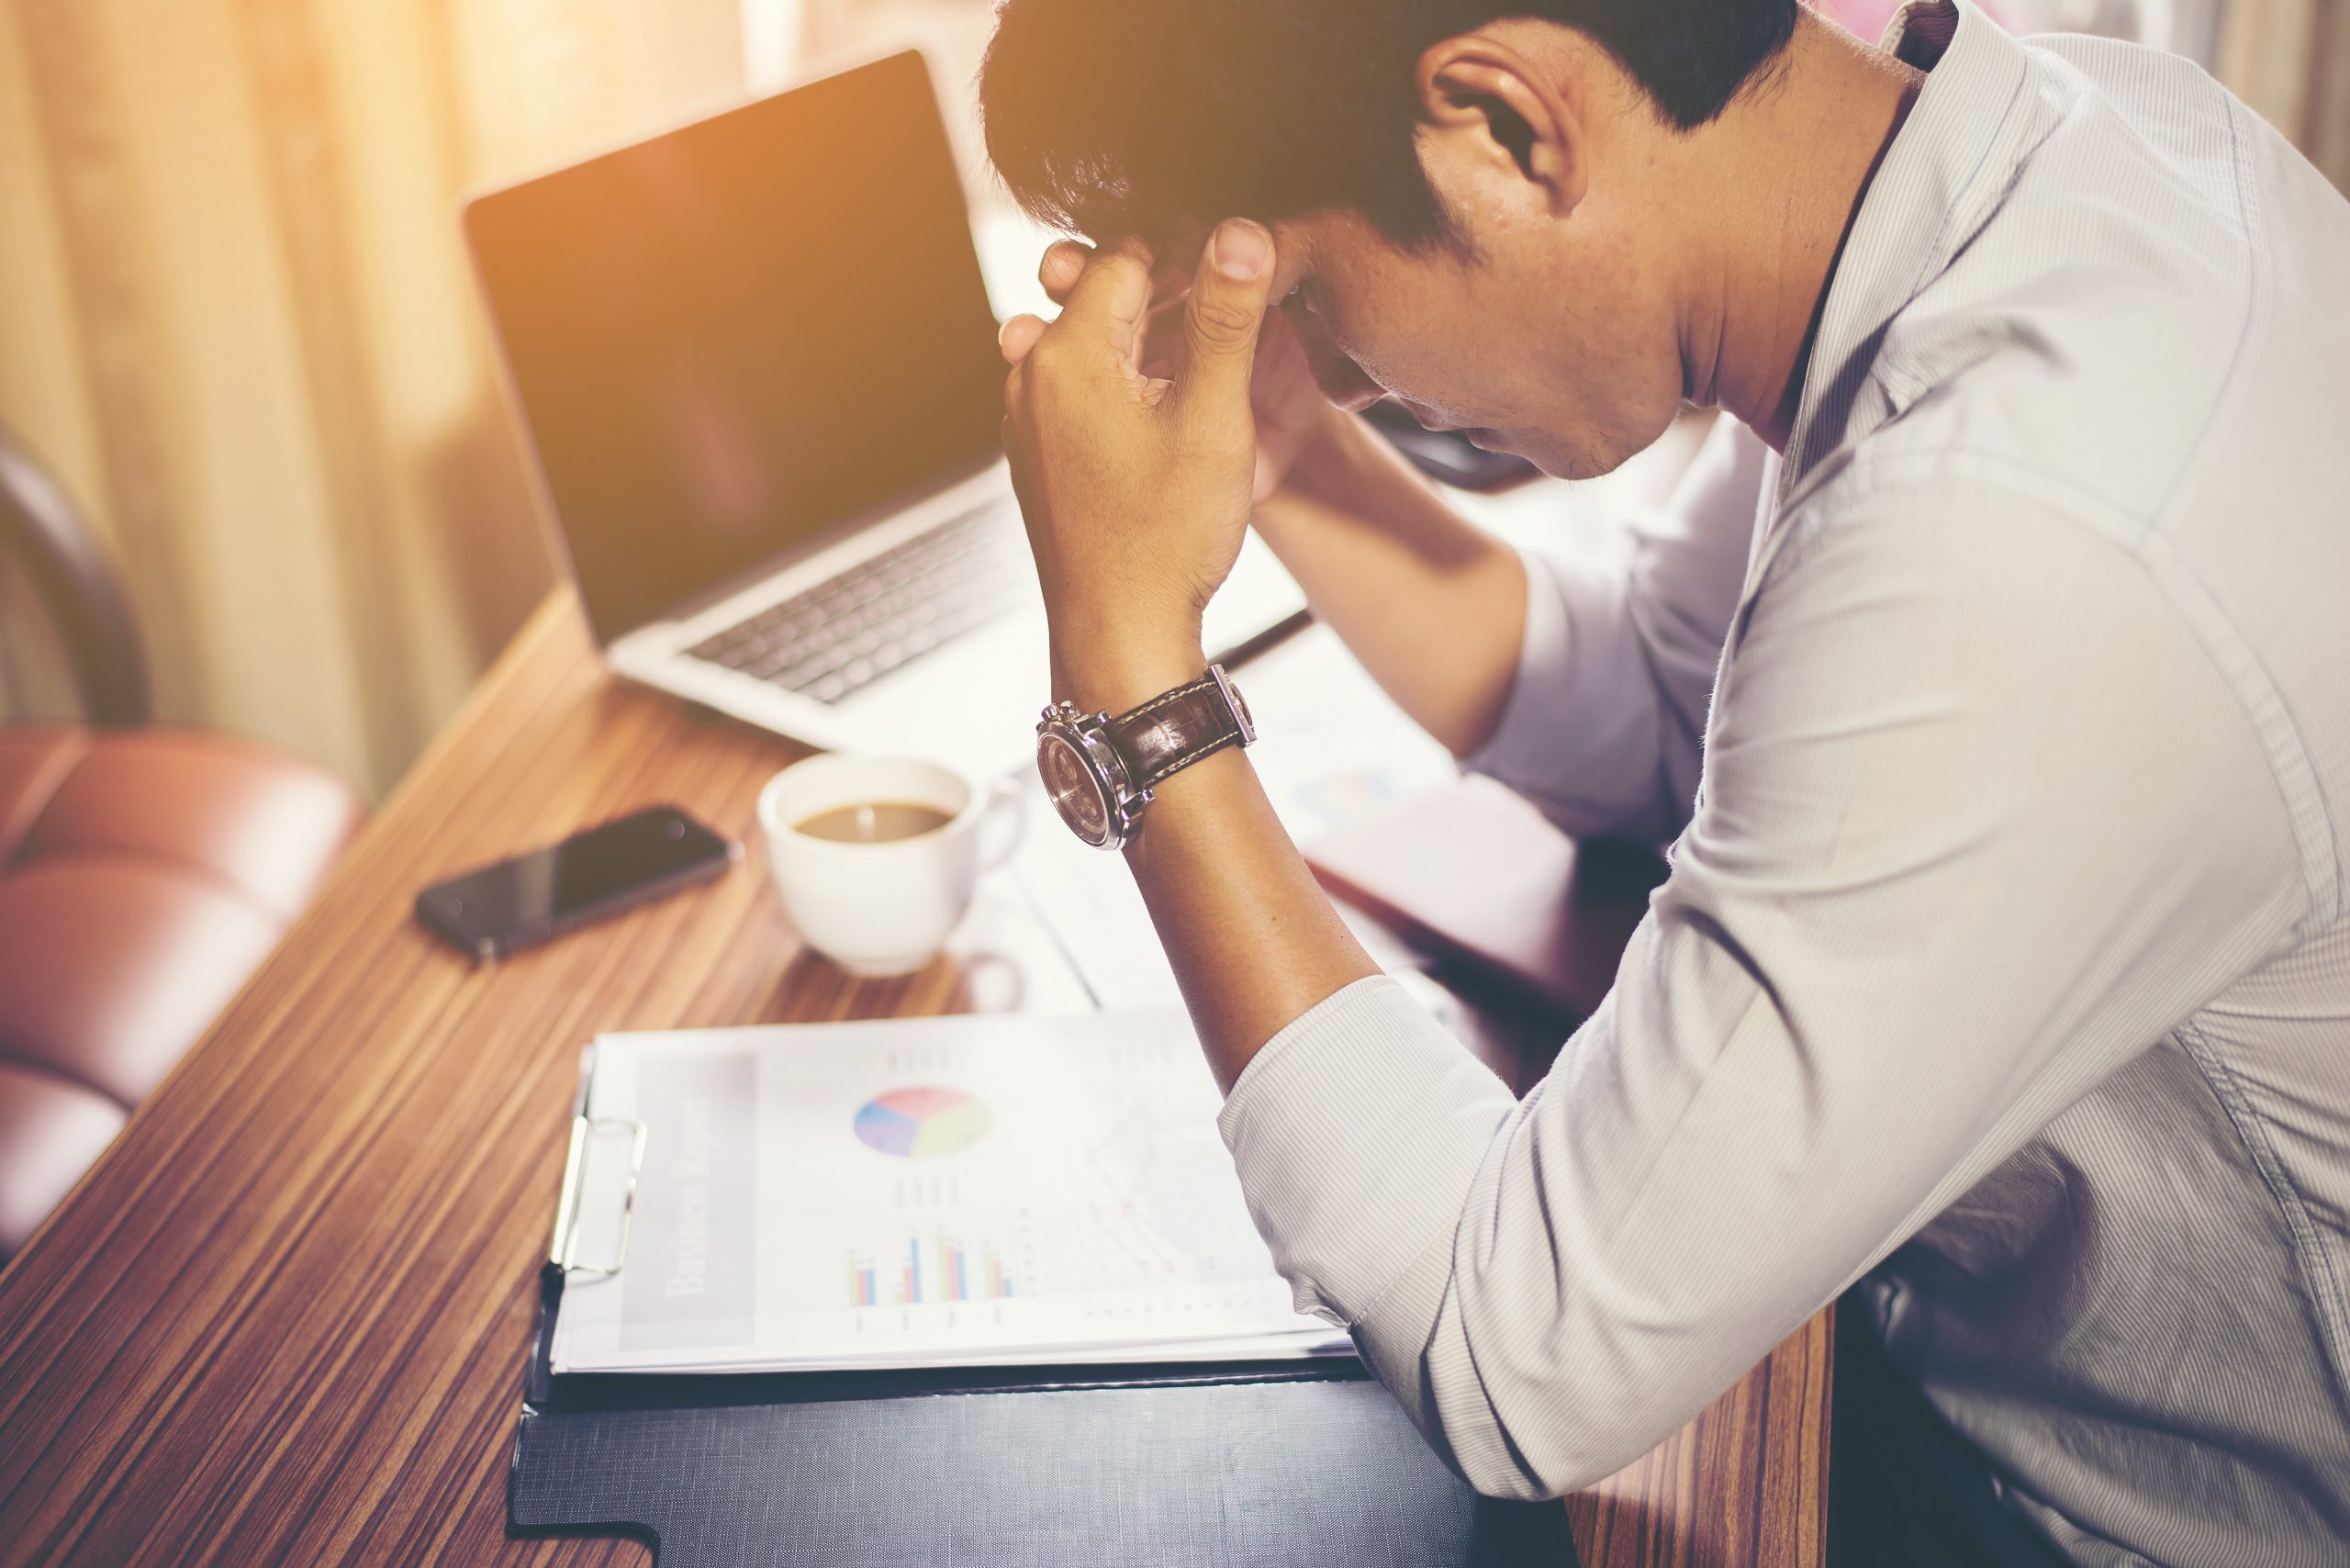 What makes an employee unhappy at work